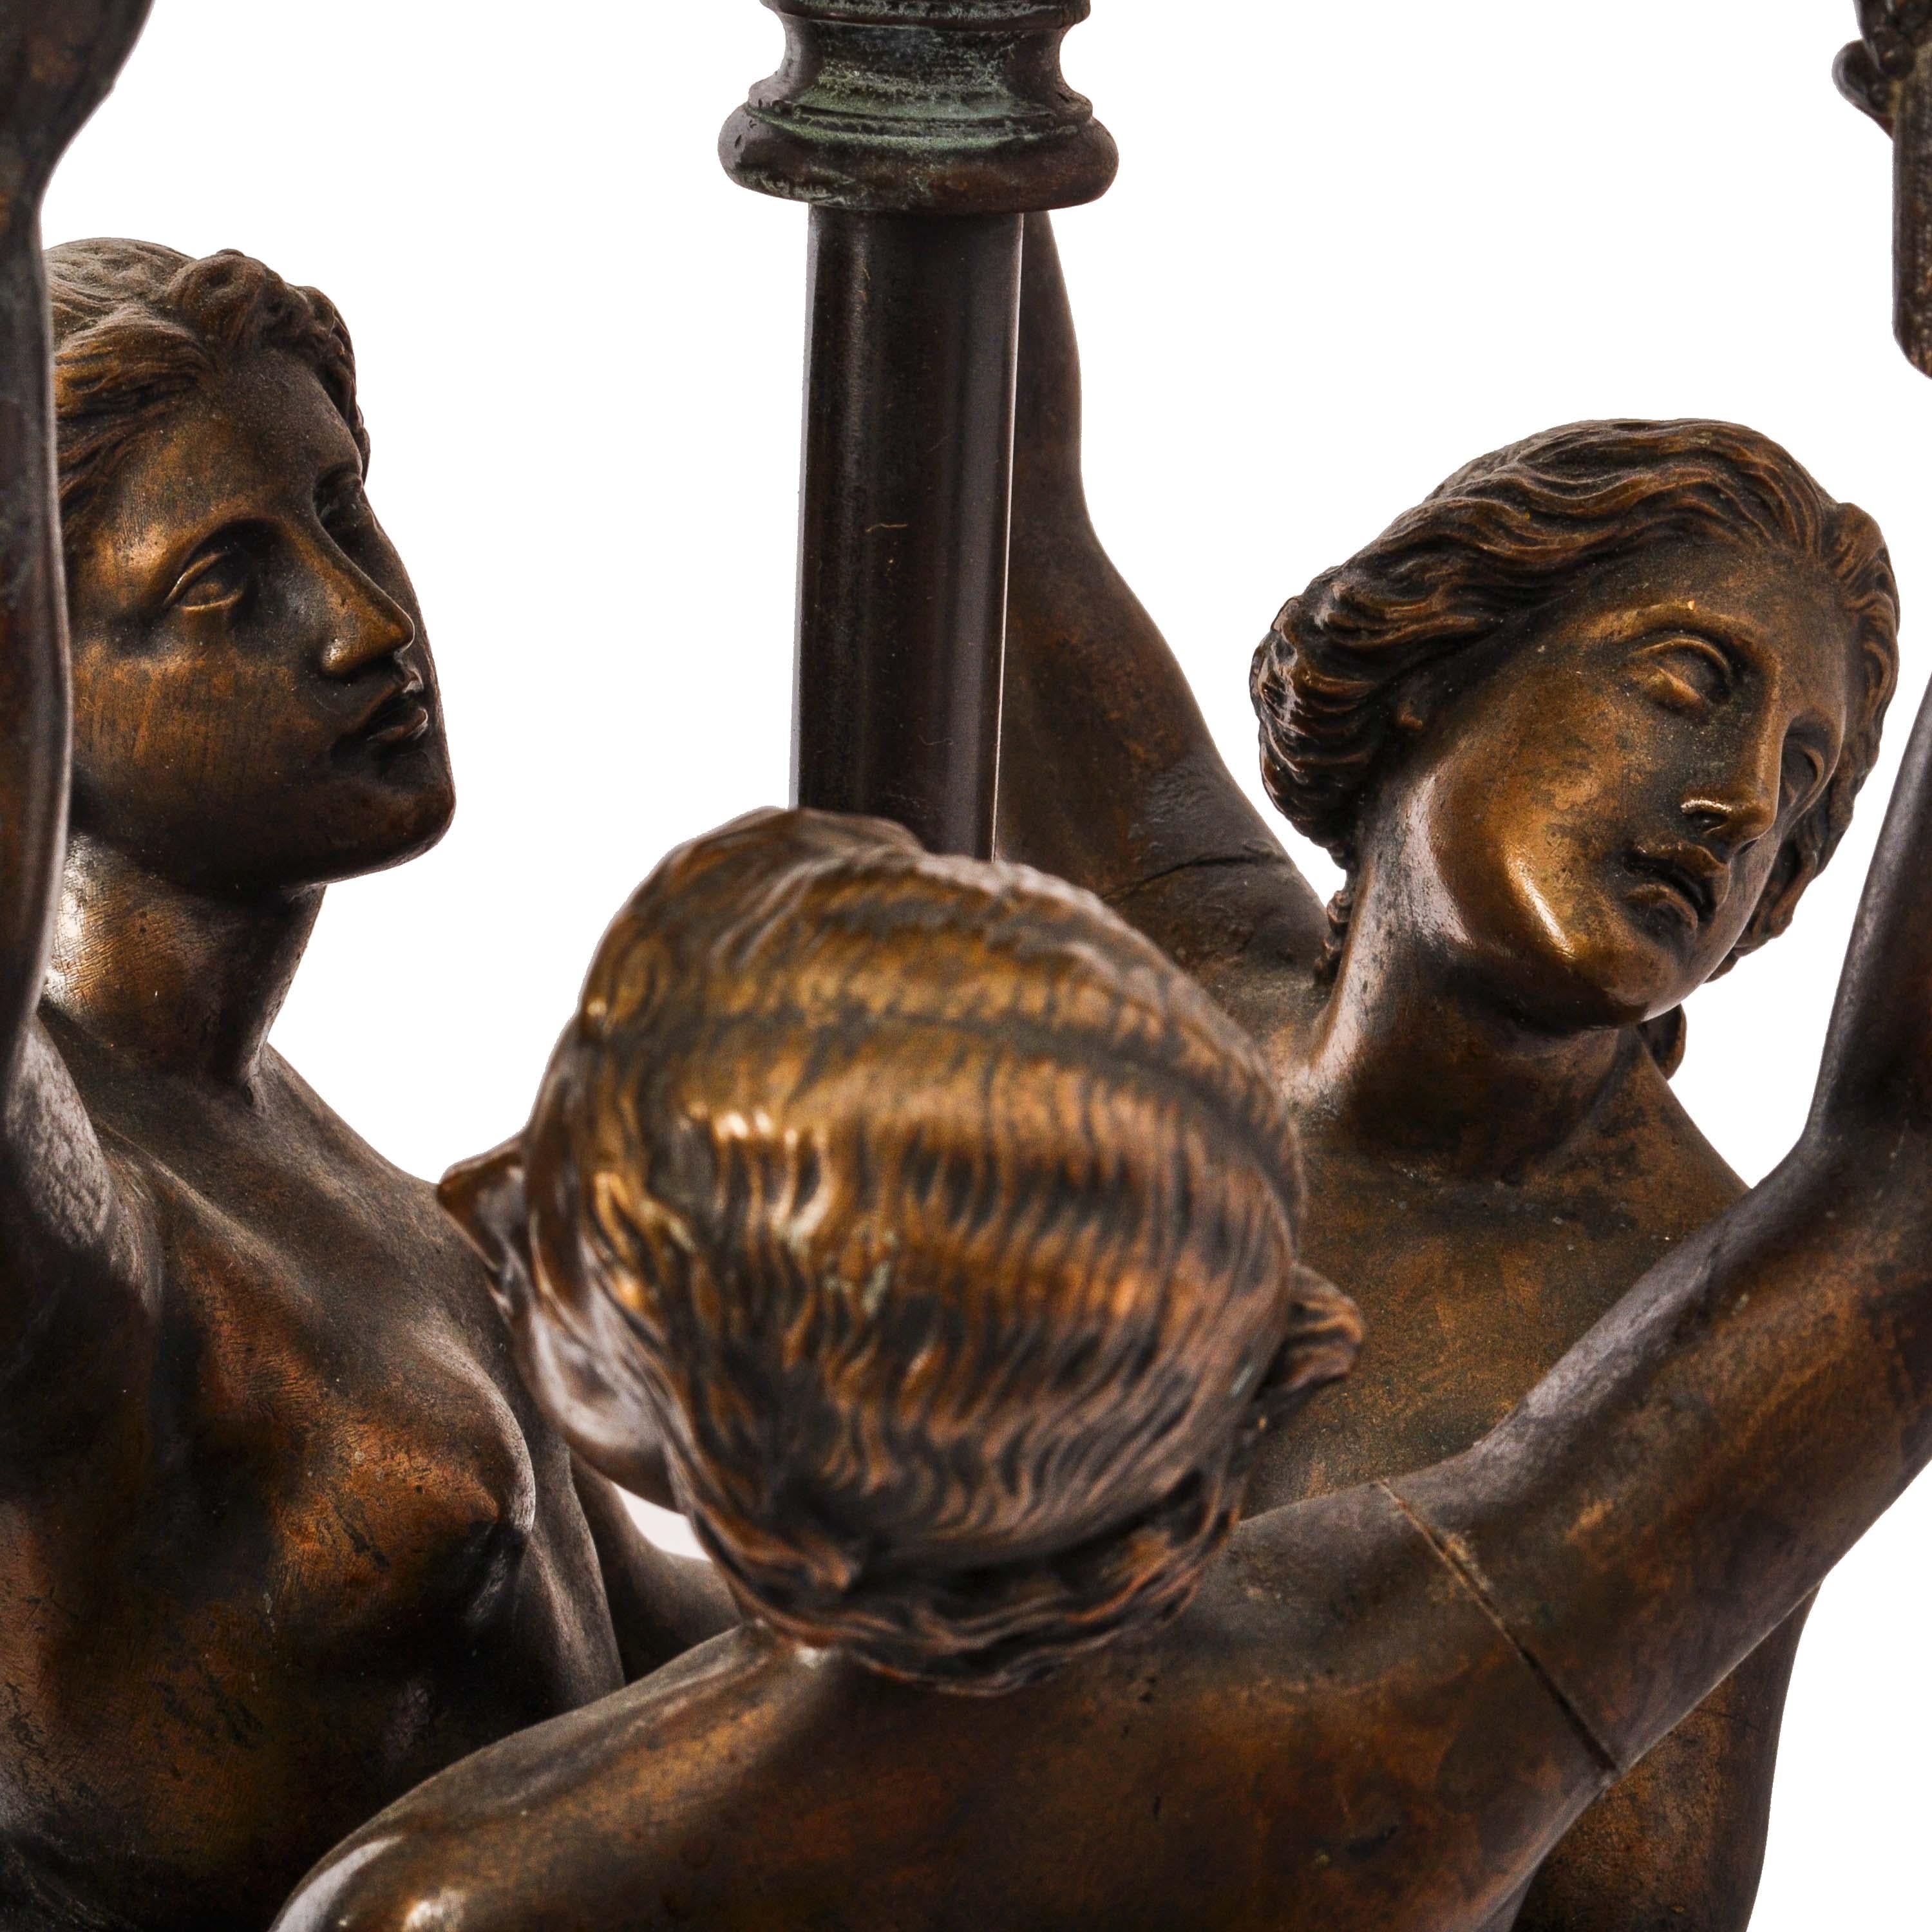 Early 20th Century Antique French Bronze & Marble Statue Sculpture Table Lamp The Three Graces 1900